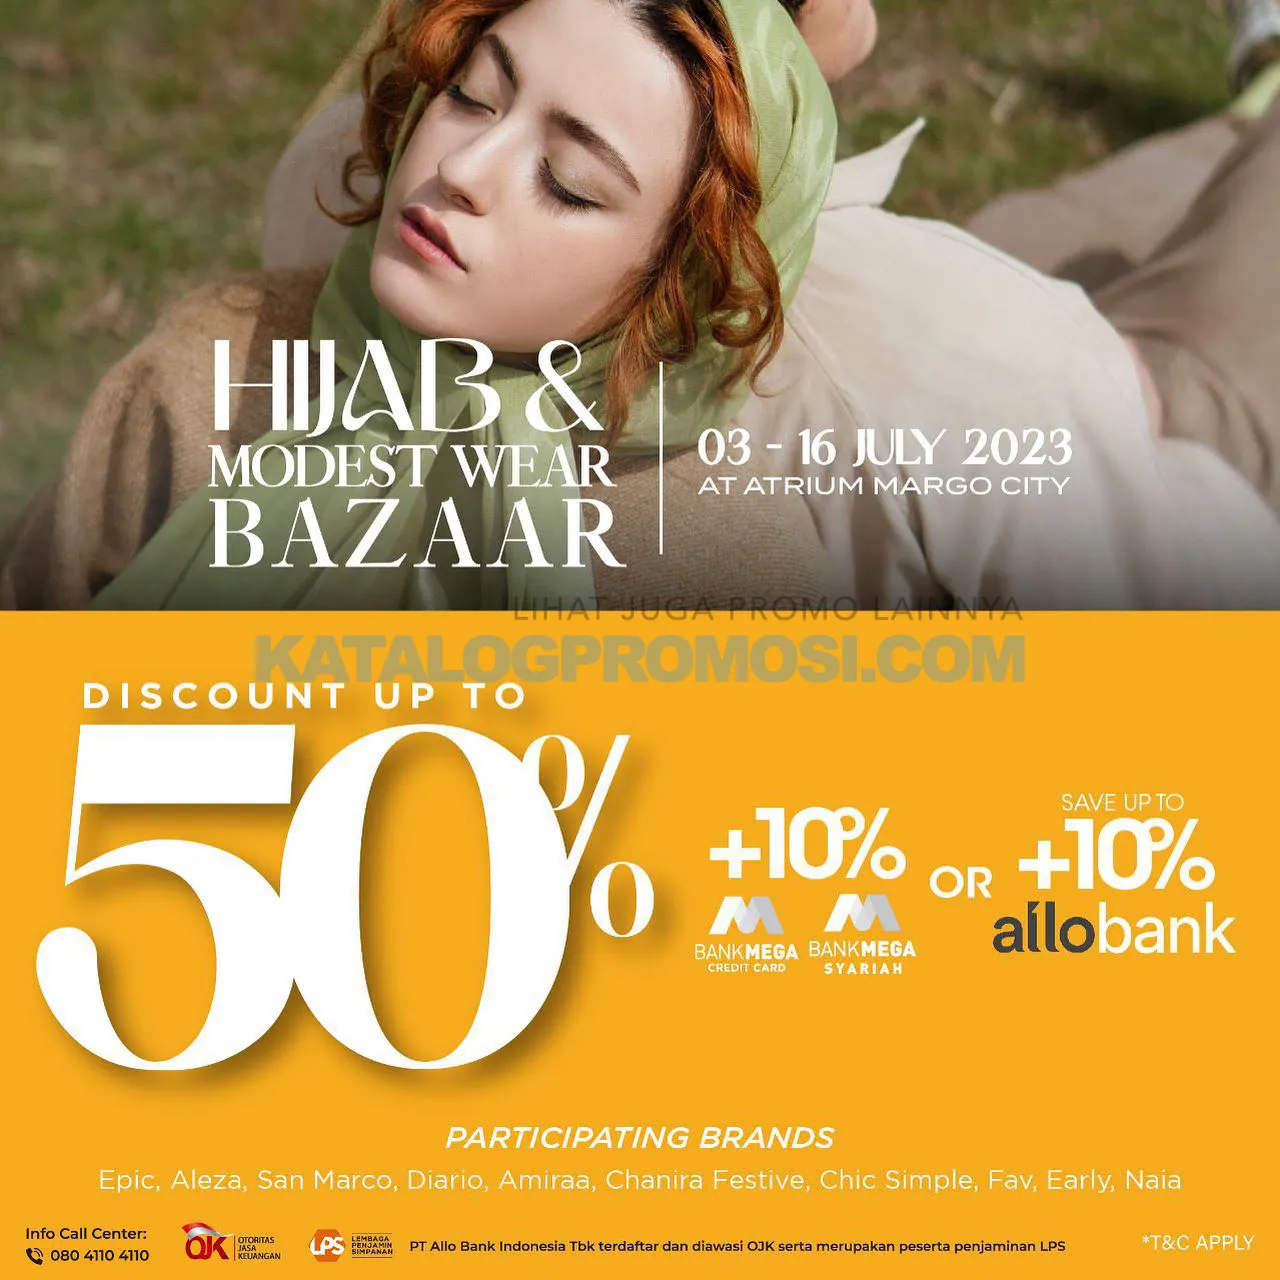 Promo METRO HIJAB & MODEST WEAR BAZAAR di MARGO CITY - DISCOUNT up to 50% off + 10% off